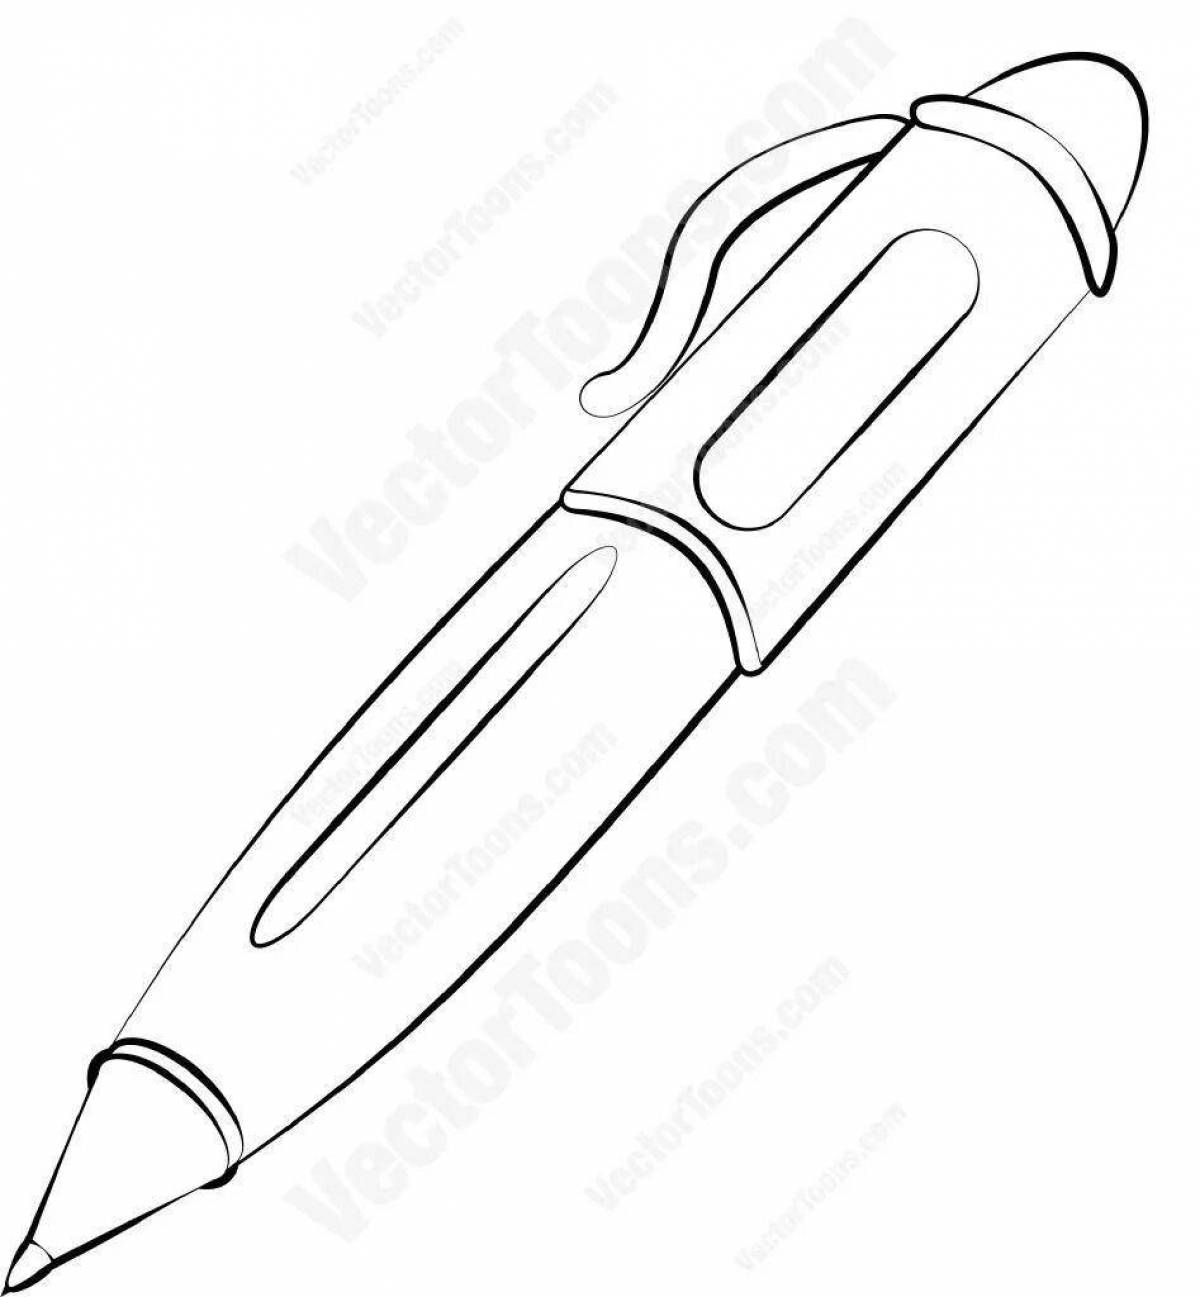 Colored vibrant coloring page with ballpoint pen